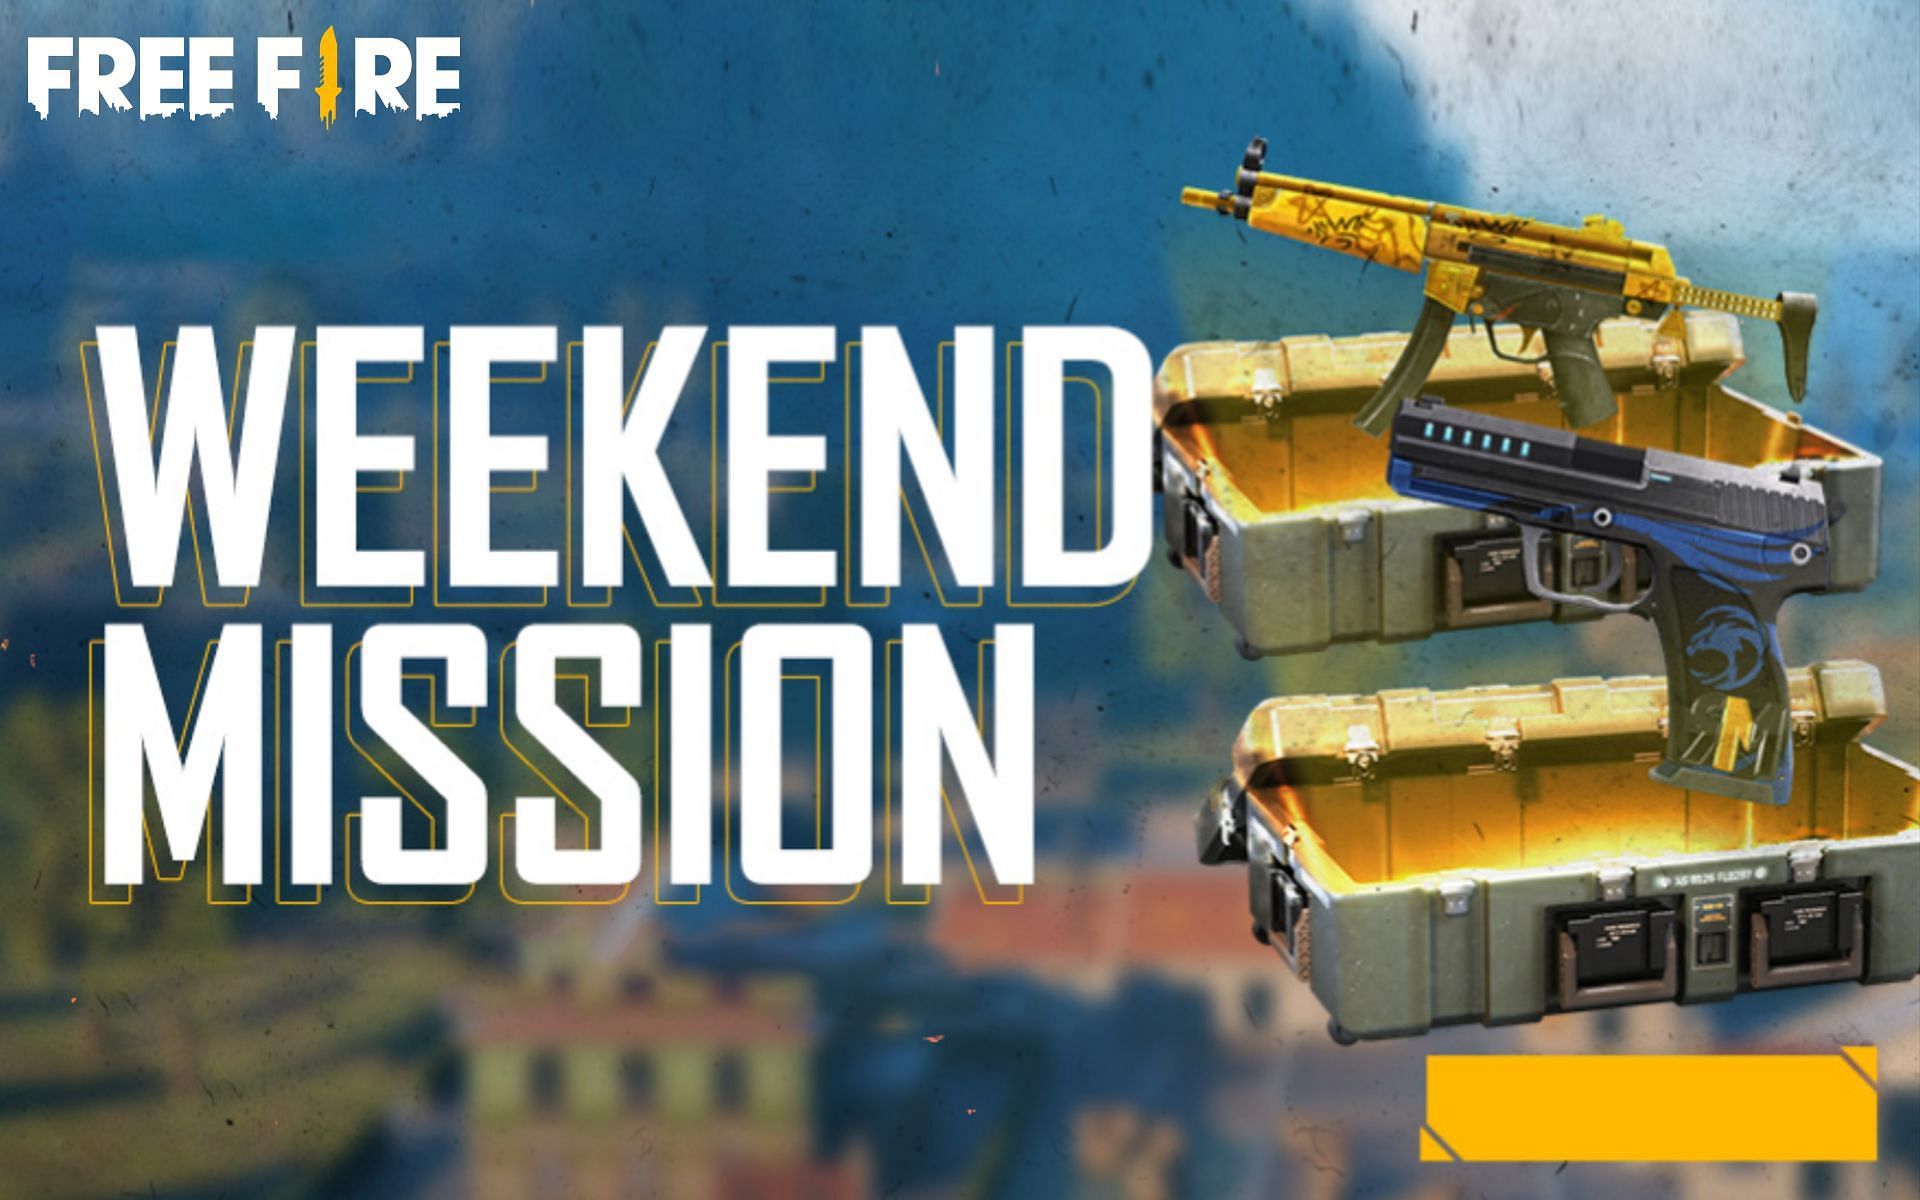 The new Weekend Mission in Free Fire (Image via Garena)